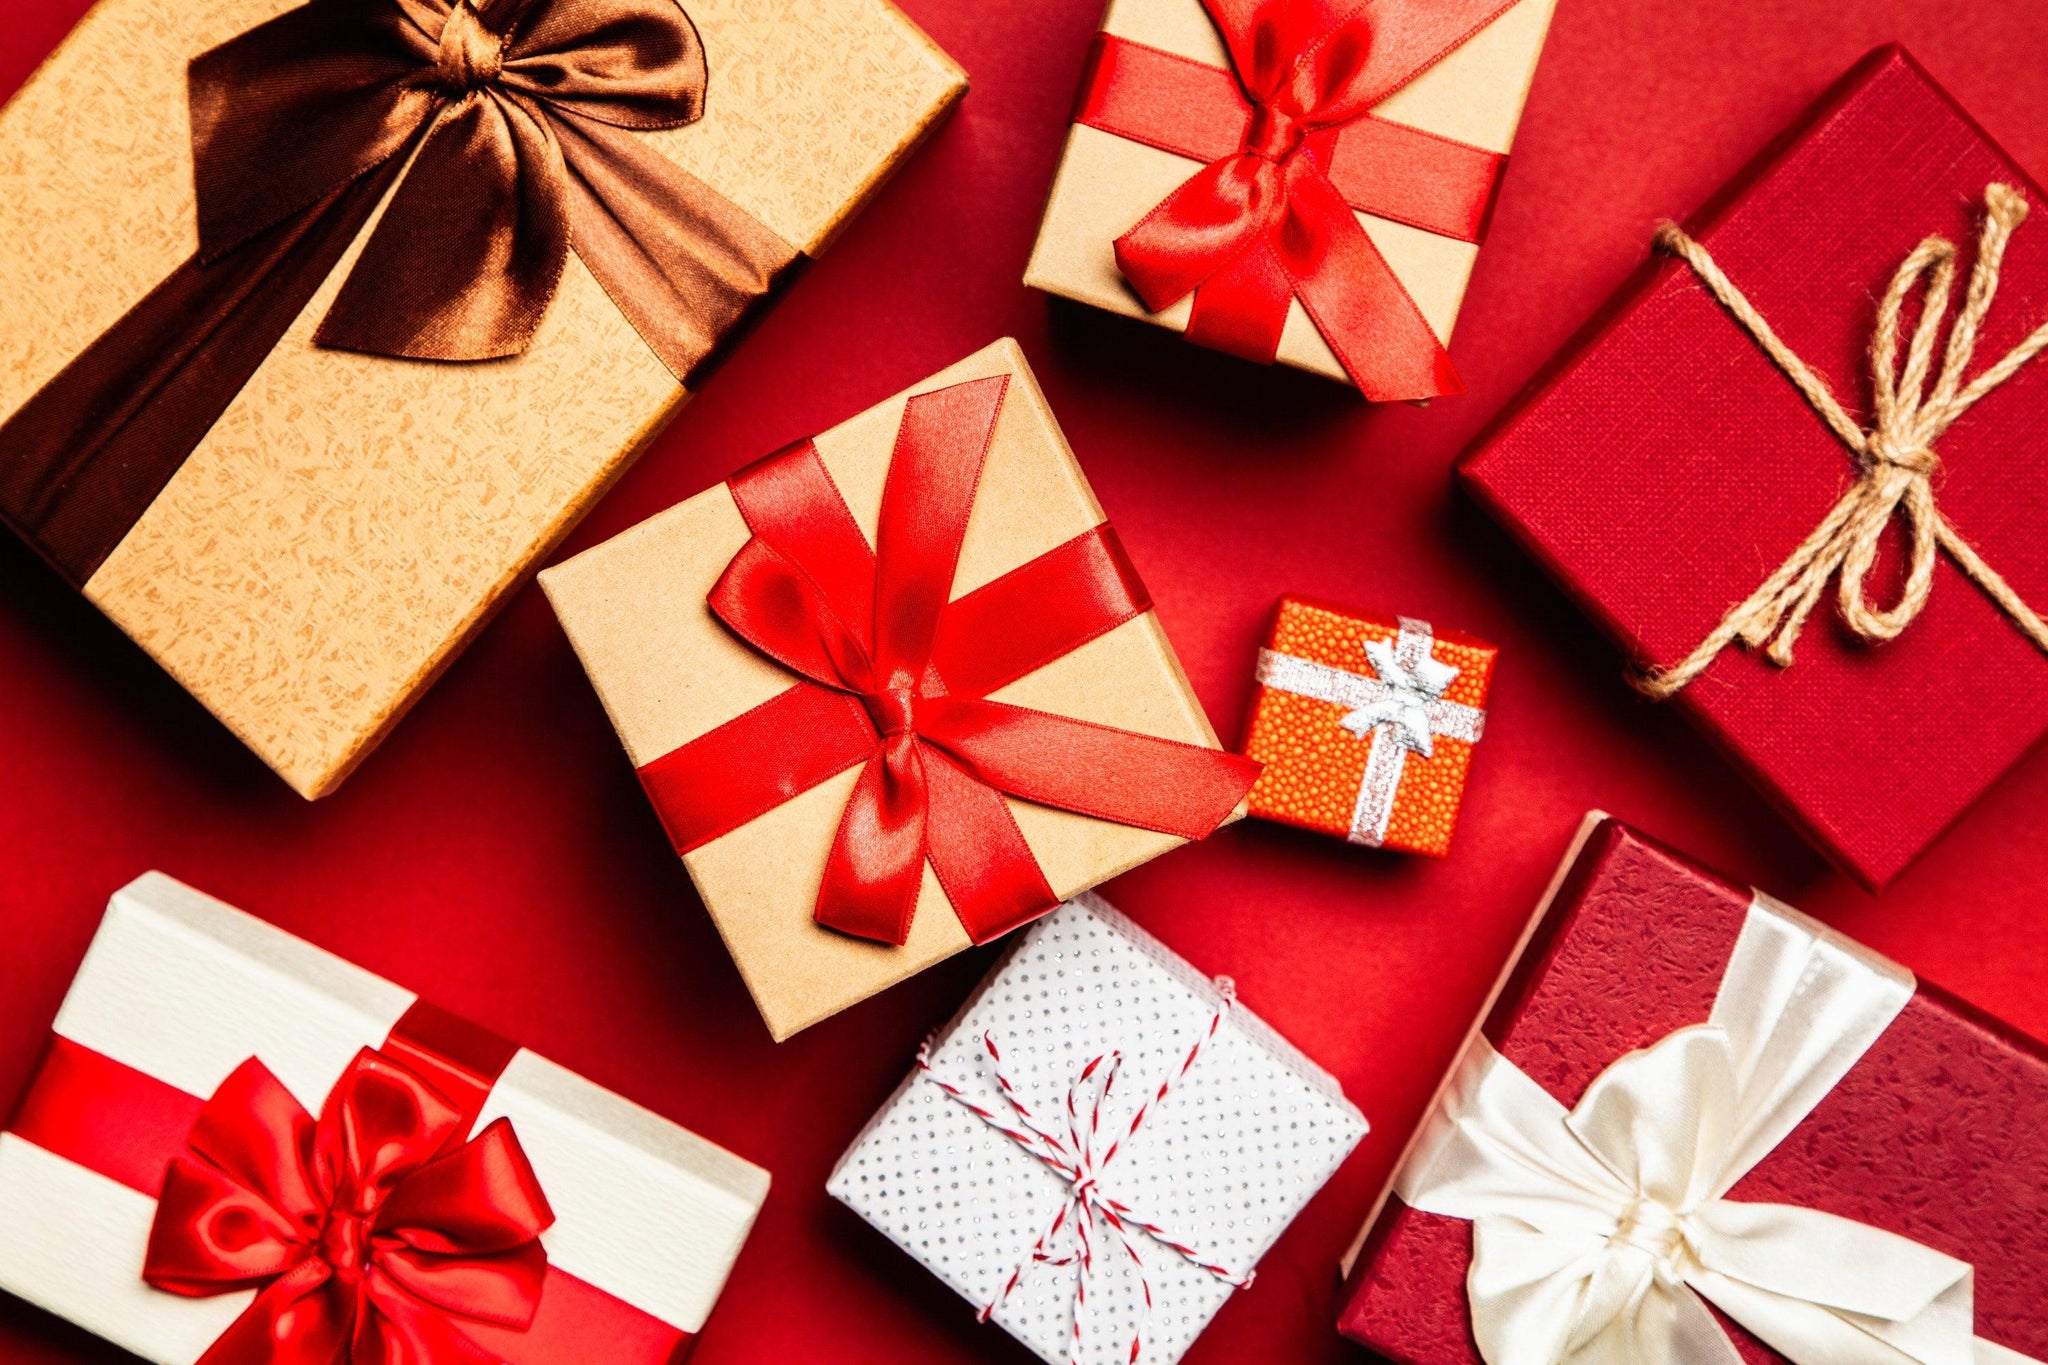 Common Questions About Sending Gift Orders